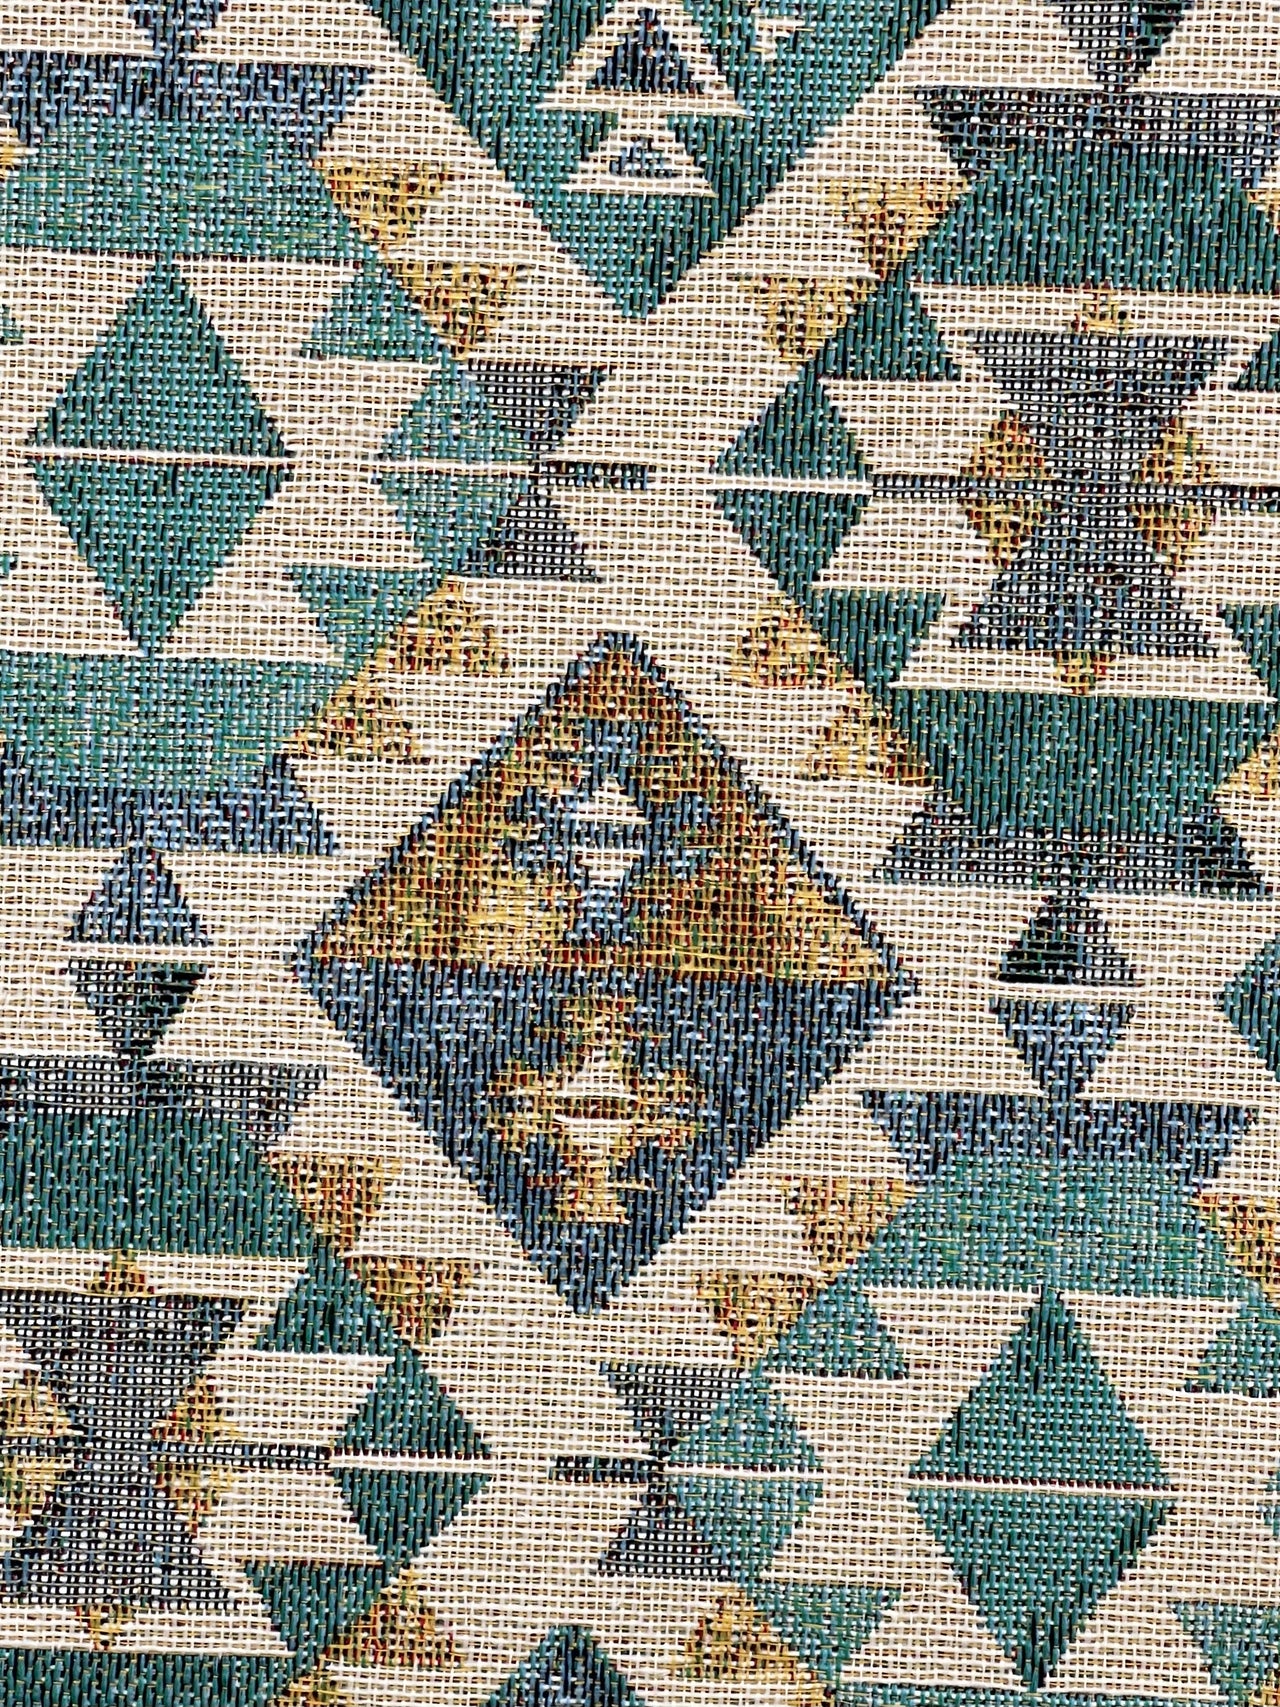 Moroccan-Inspired Kilim Fabric: Blue, Yellow, and Green - Elevate Your Unique Home Decor - Sold by the Metre